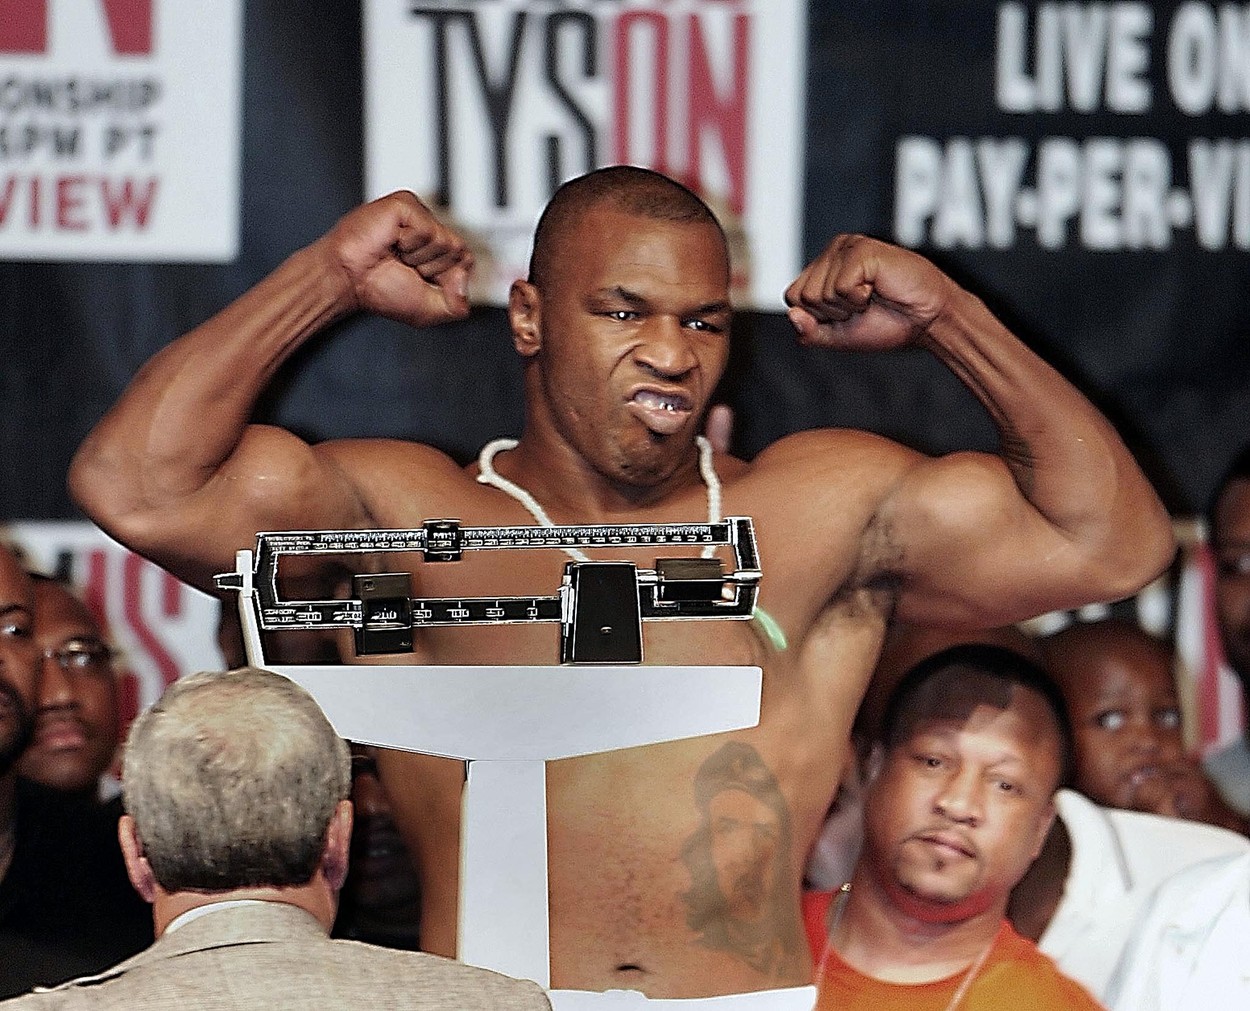 Heavyweight challenger Mike Tyson flexes after weighing in at 234 1/2 pounds in Memphis, Tennessee 06 June, 2002. Tyson  will face the defending champion Lennox Lewis for the WBC/IBF Heavyweight Championship in Memphis 08 June.,Image: 69379561, License: Rights-managed, Restrictions: , Model Release: no